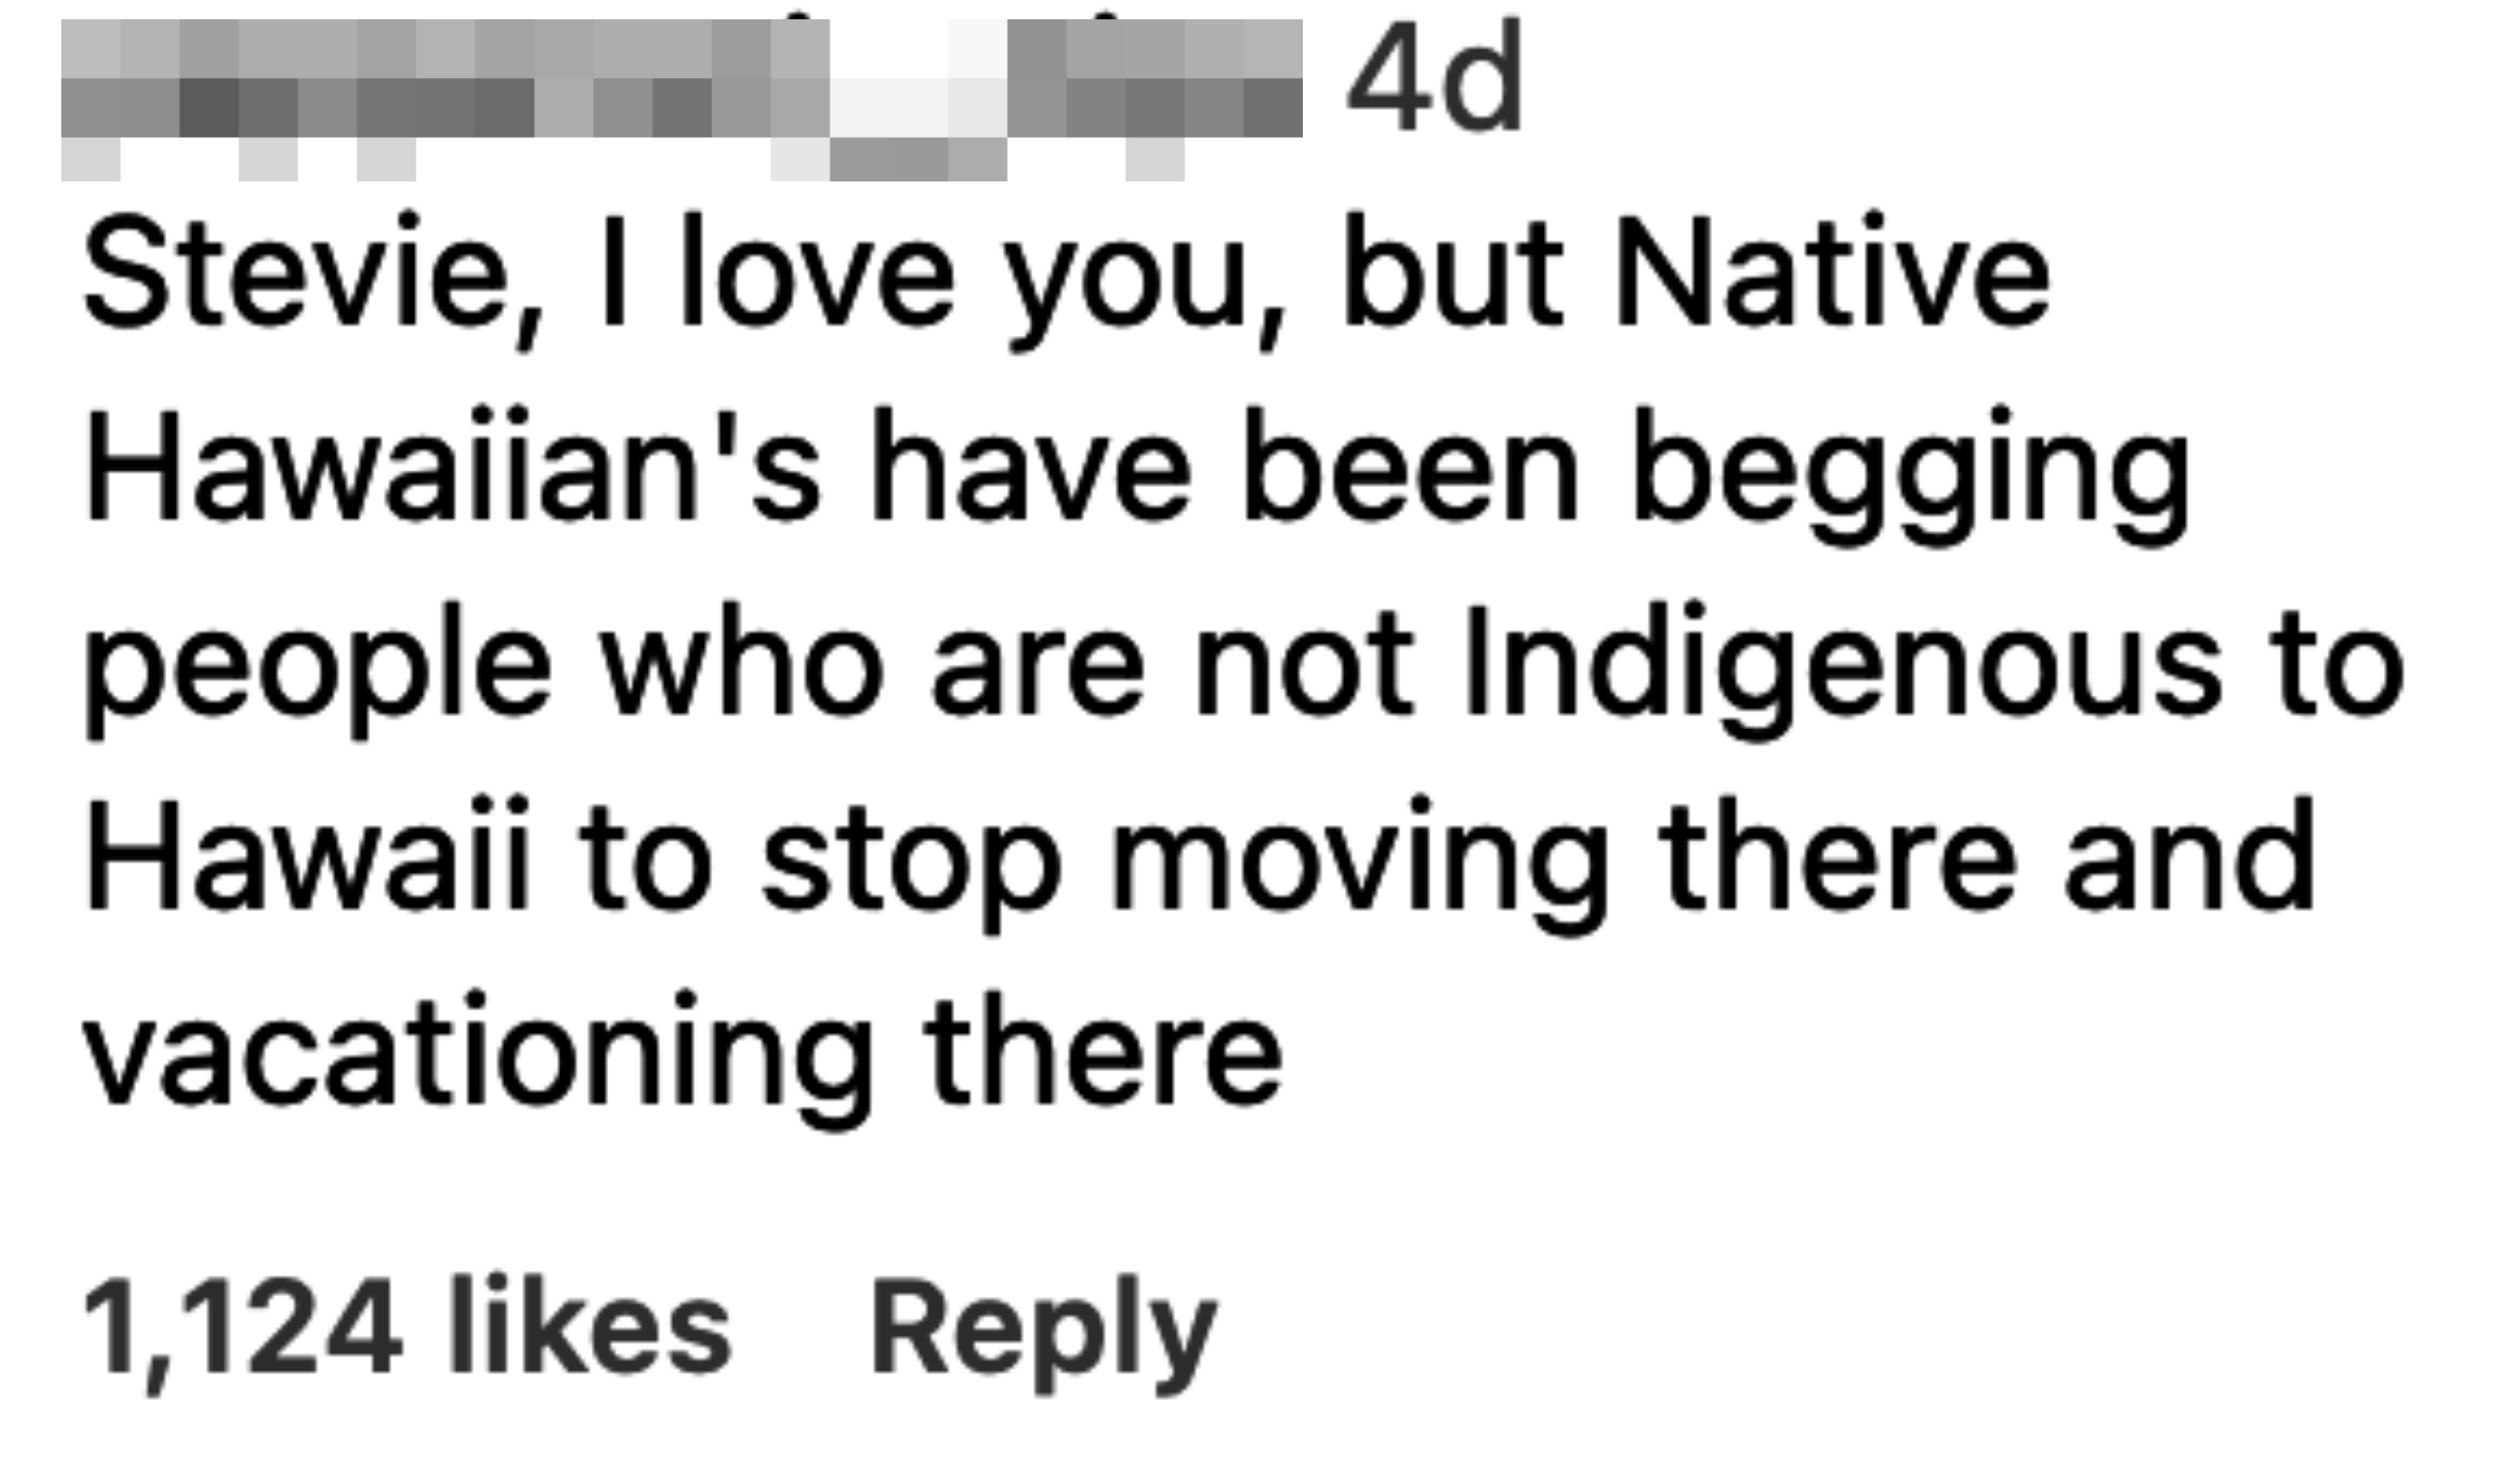 &quot;Stevie, I love you, but Native Hawaiians have been begging people who are not Indigenous to Hawaii to stop moving there and vacationing there&quot;